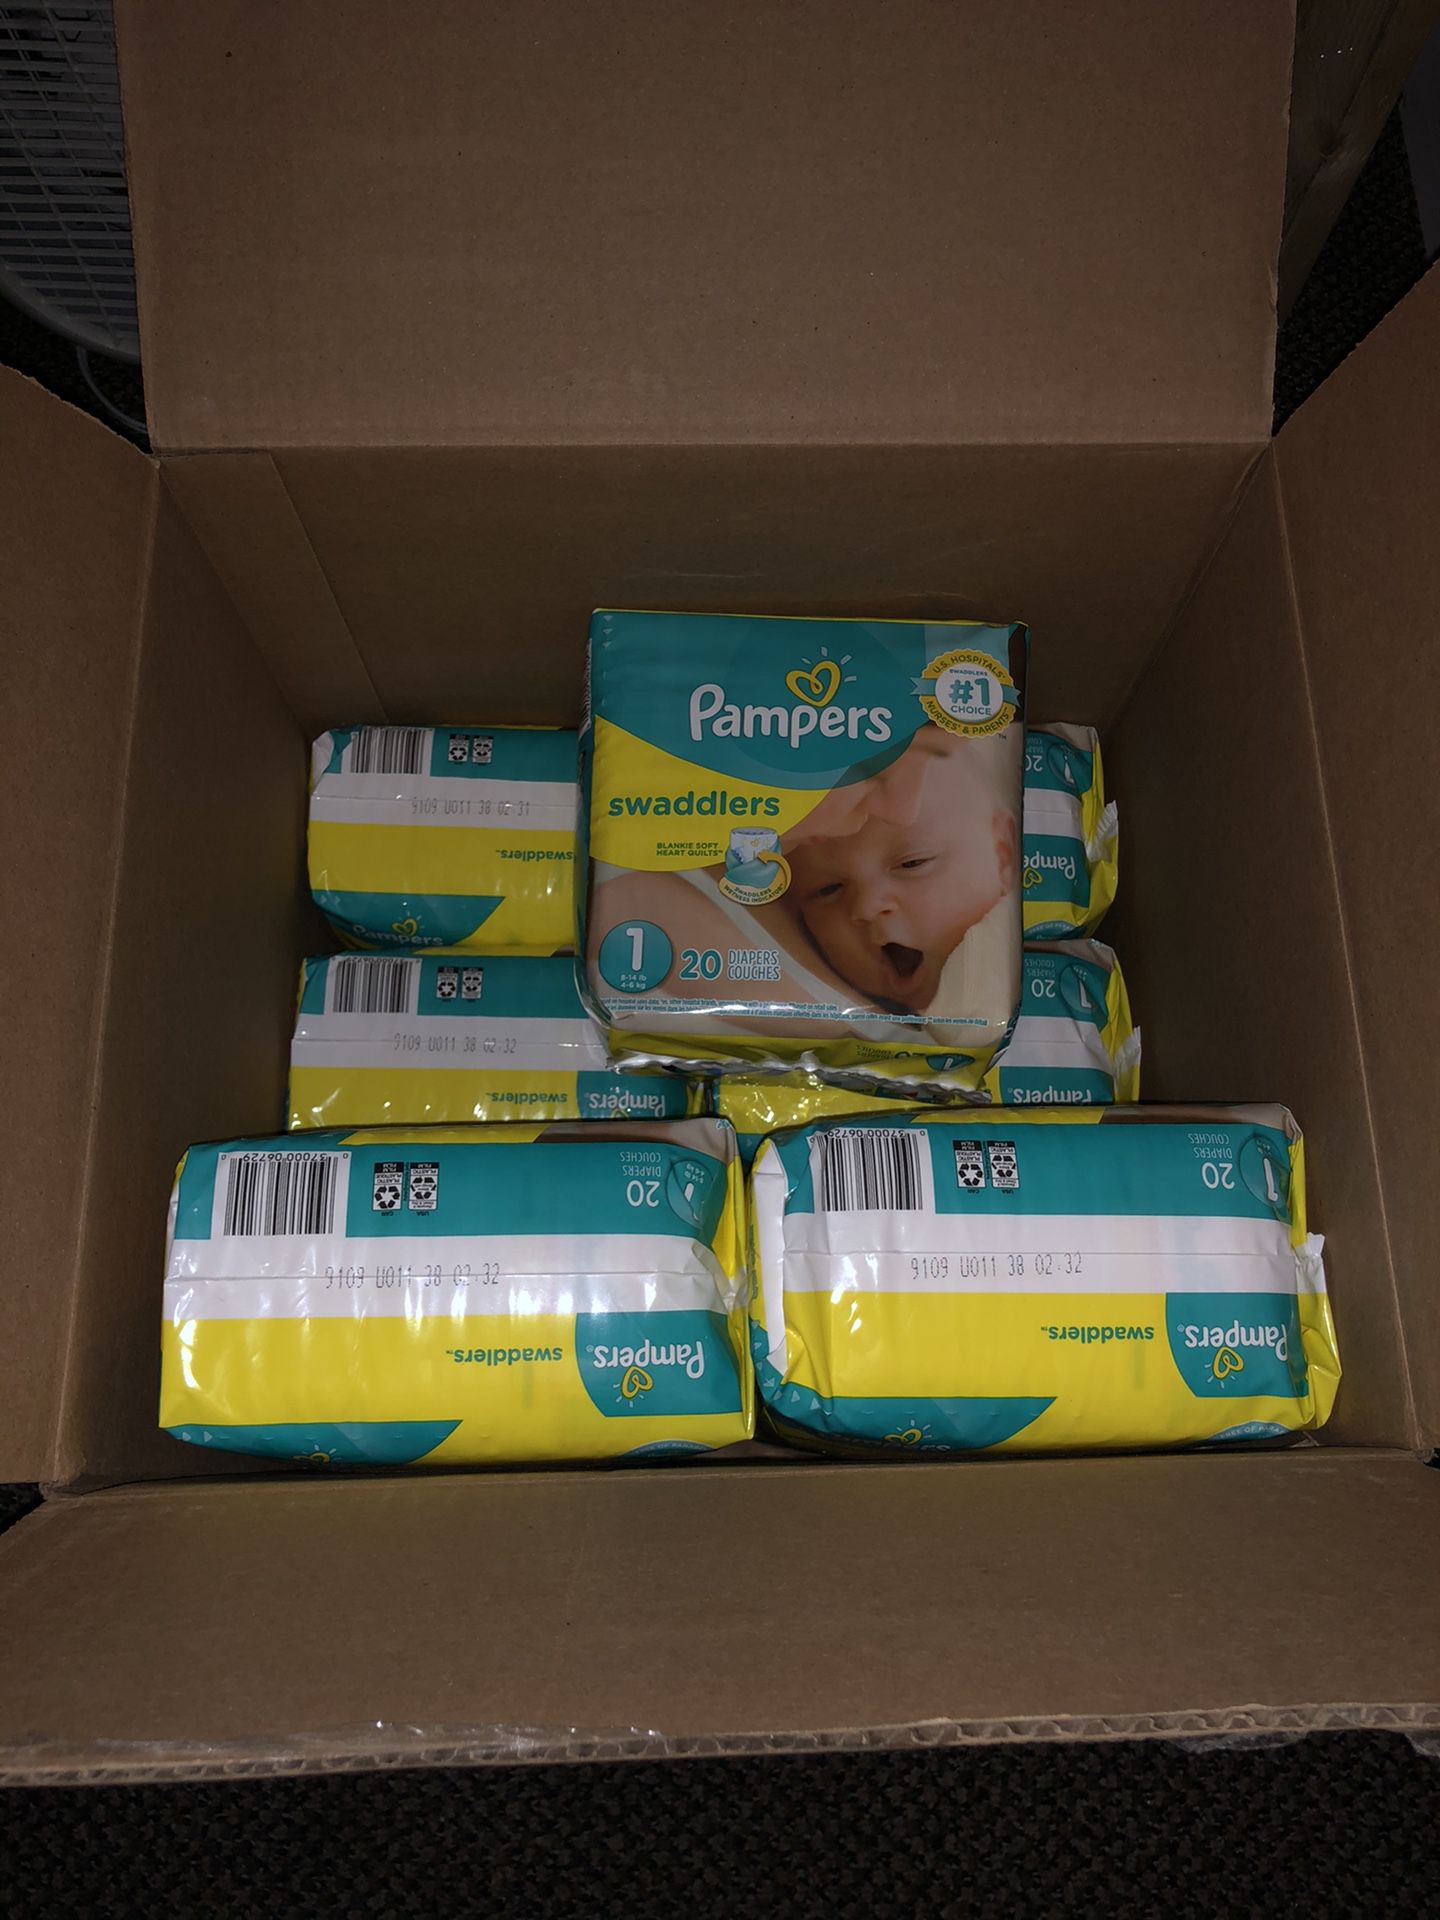 Pampers Swadders Size 1 - 180 count